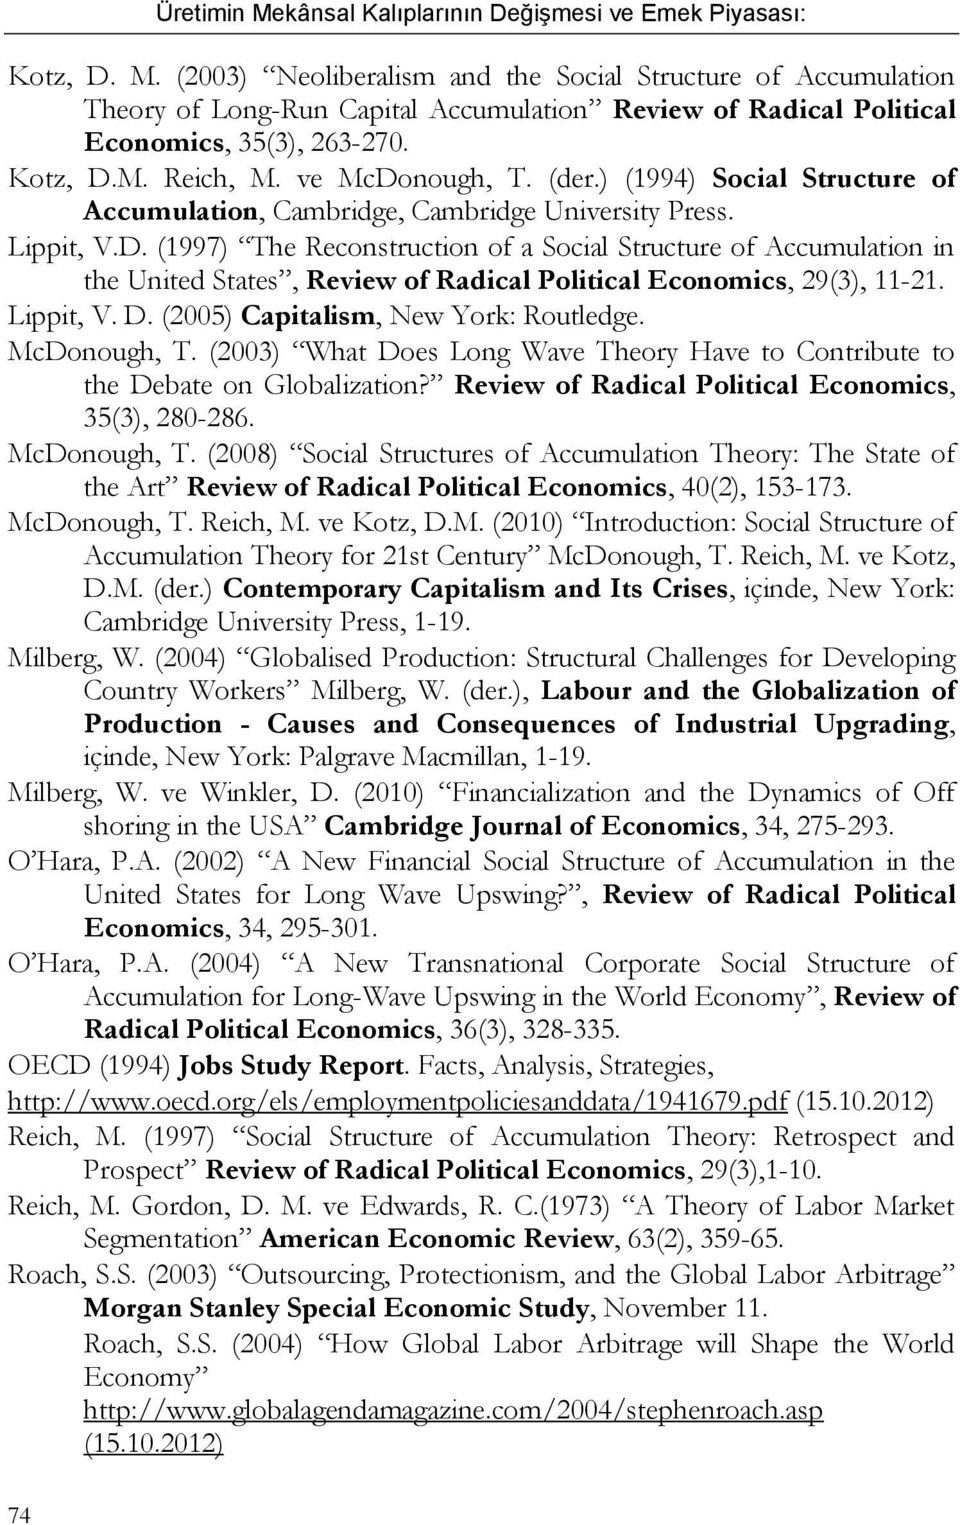 Lippit, V. D. (2005) Capitalism, New York: Routledge. McDonough, T. (2003) What Does Long Wave Theory Have to Contribute to the Debate on Globalization?